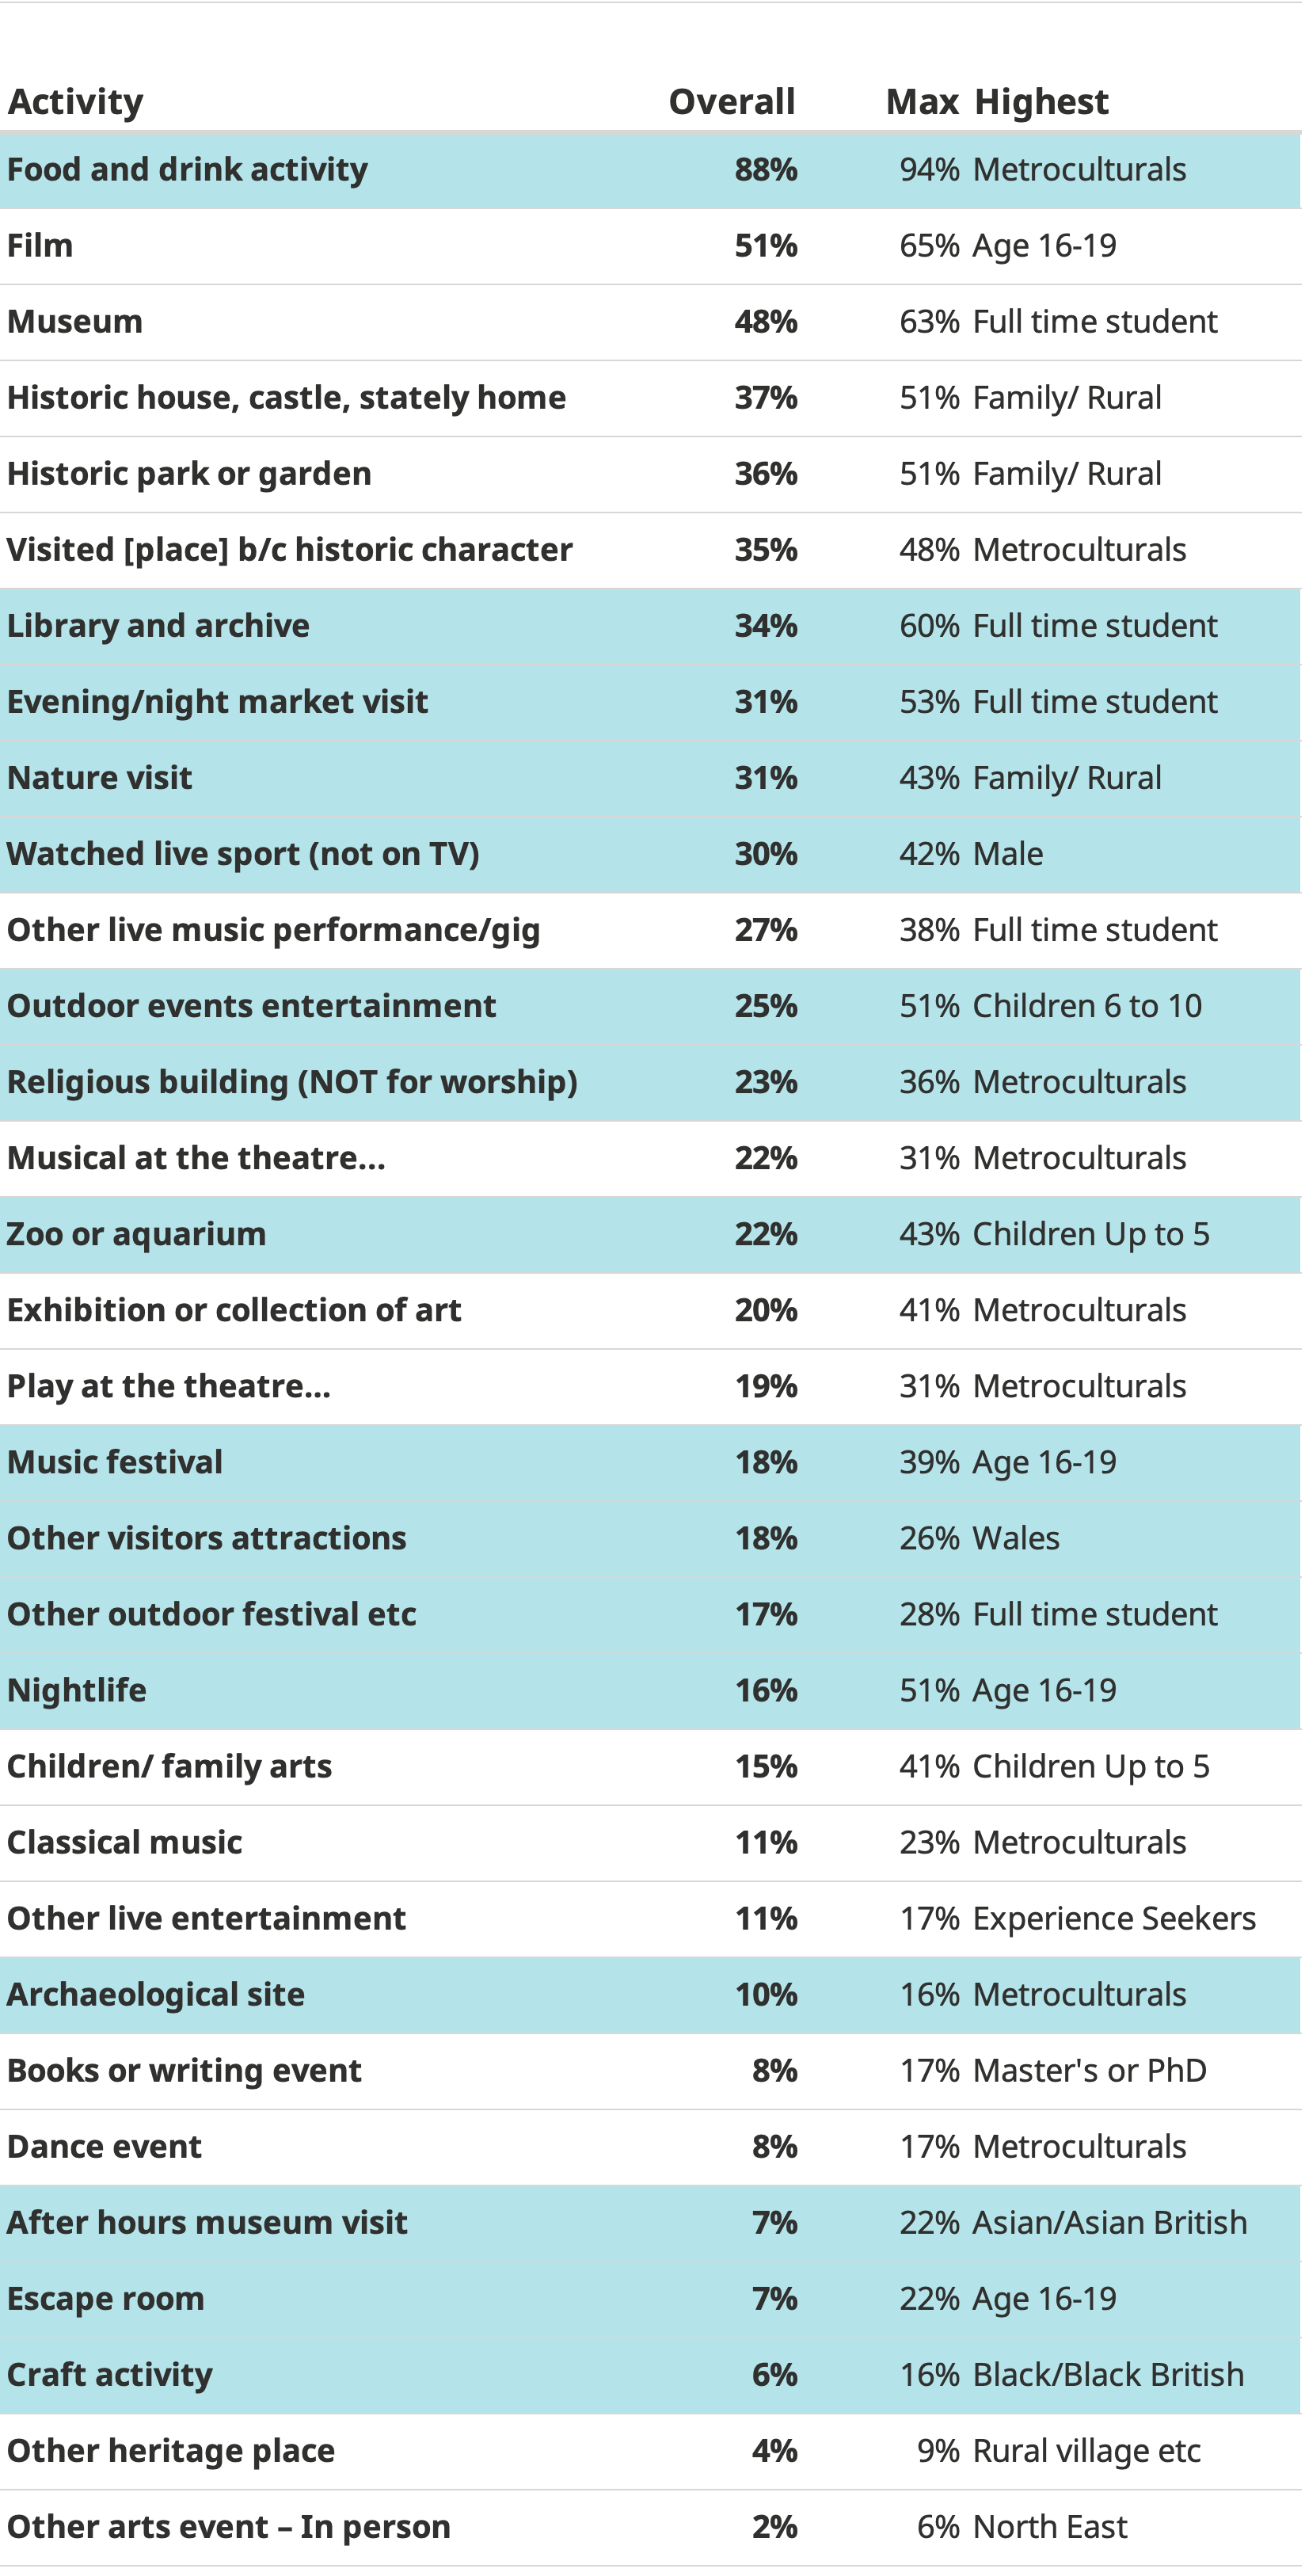 Activity	Overall	Max	Highest Food and drink activity	88%	94%	Metroculturals Film	51%	65%	Age 16-19 Museum	48%	63%	Full time student Historic house, castle, stately home	37%	51%	Family/ Rural Historic park or garden	36%	51%	Family/ Rural Visited [place] b/c historic character	35%	48%	Metroculturals Library and archive	34%	60%	Full time student Evening/night market visit	31%	53%	Full time student Nature visit	31%	43%	Family/ Rural Watched live sport (not on TV)	30%	42%	Male Other live music performance/gig	27